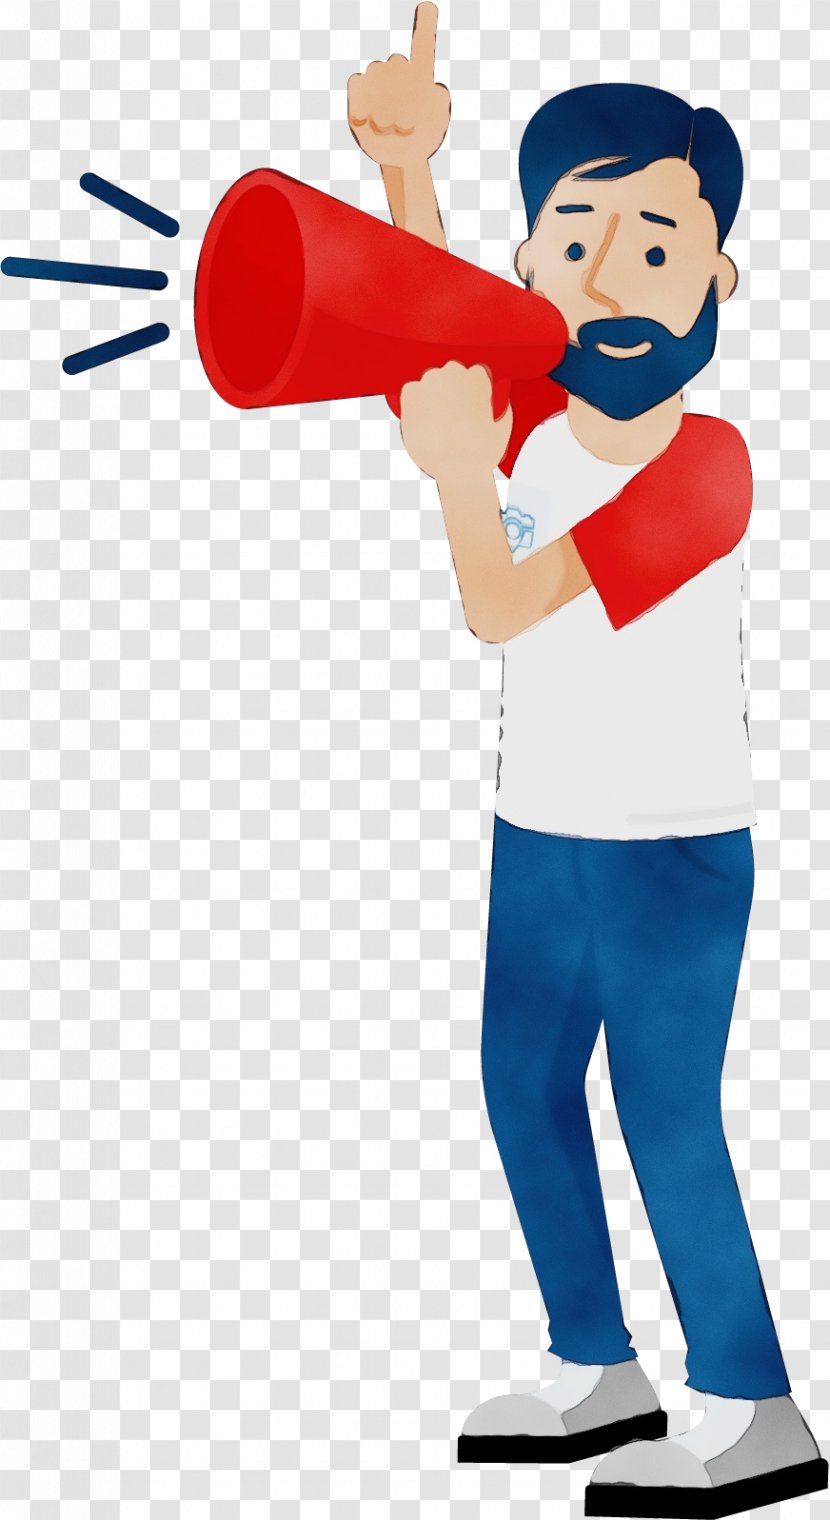 Microphone Cartoon - Mascot - Solid Swinghit Sporting Goods Transparent PNG